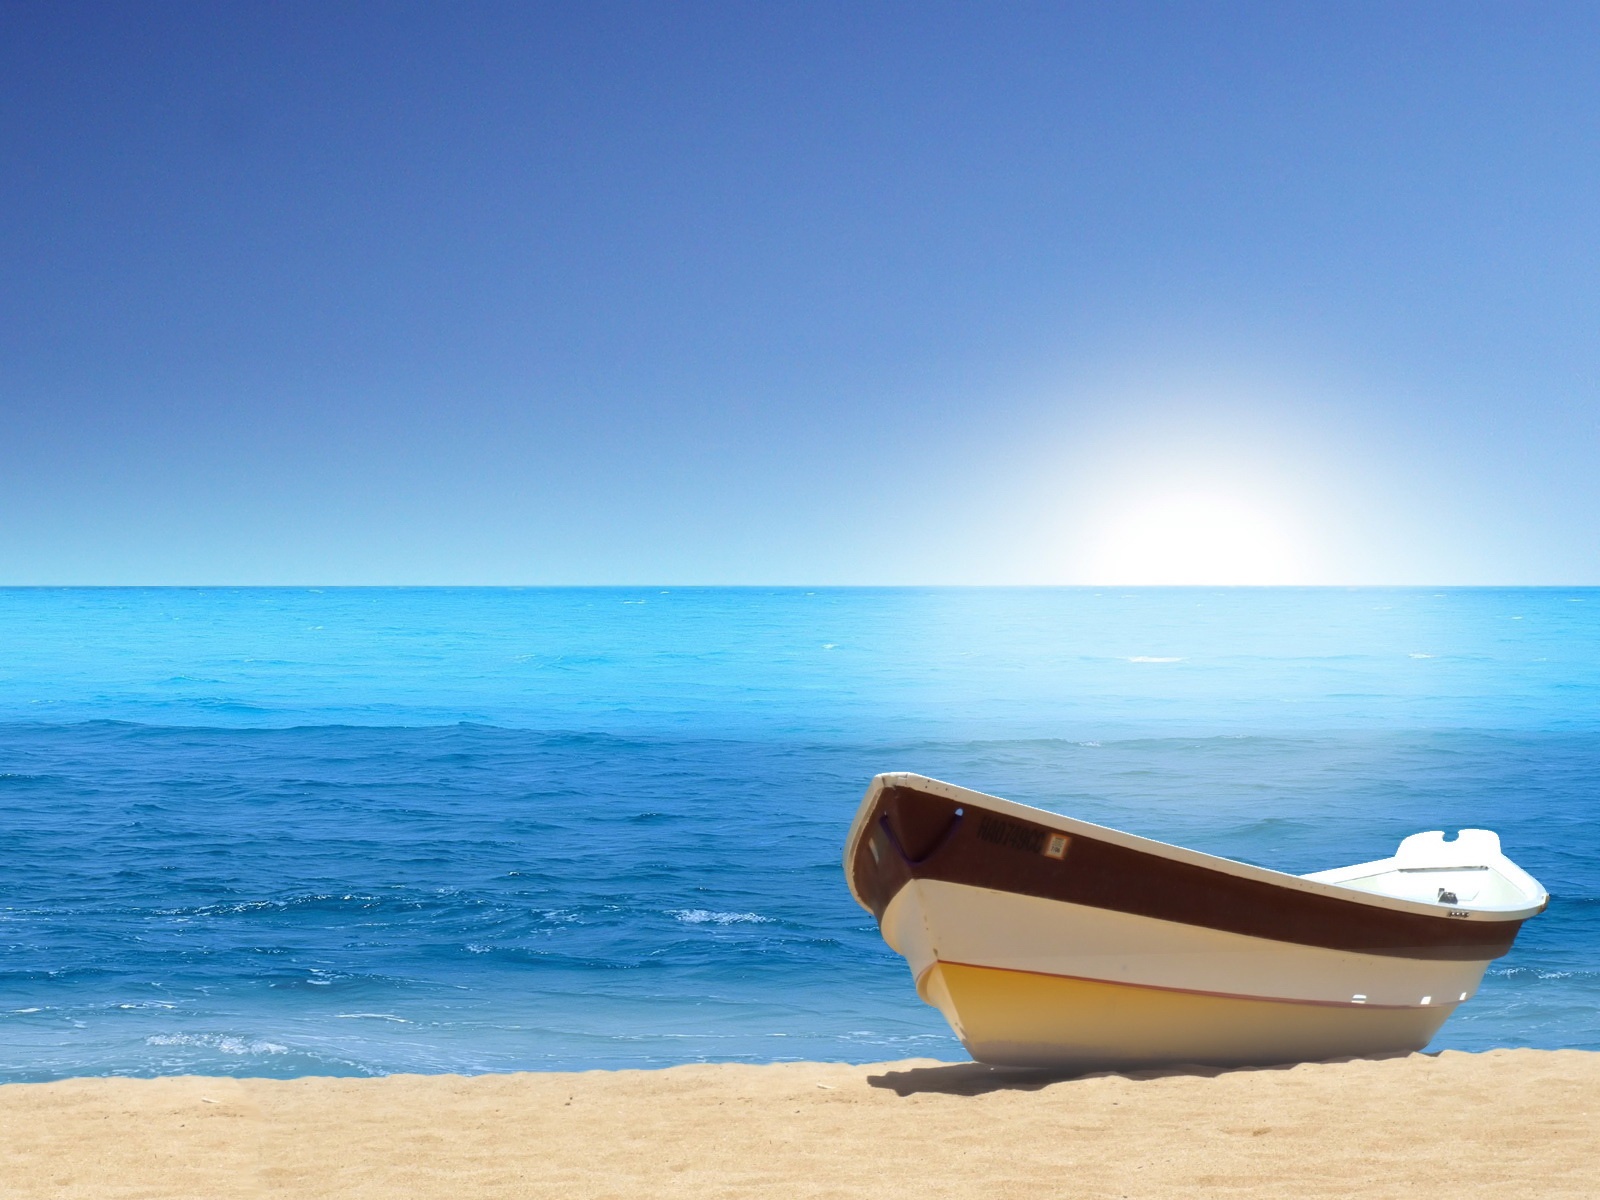 Beach HD Wallpaper In High Resolution For Get Boat Sea